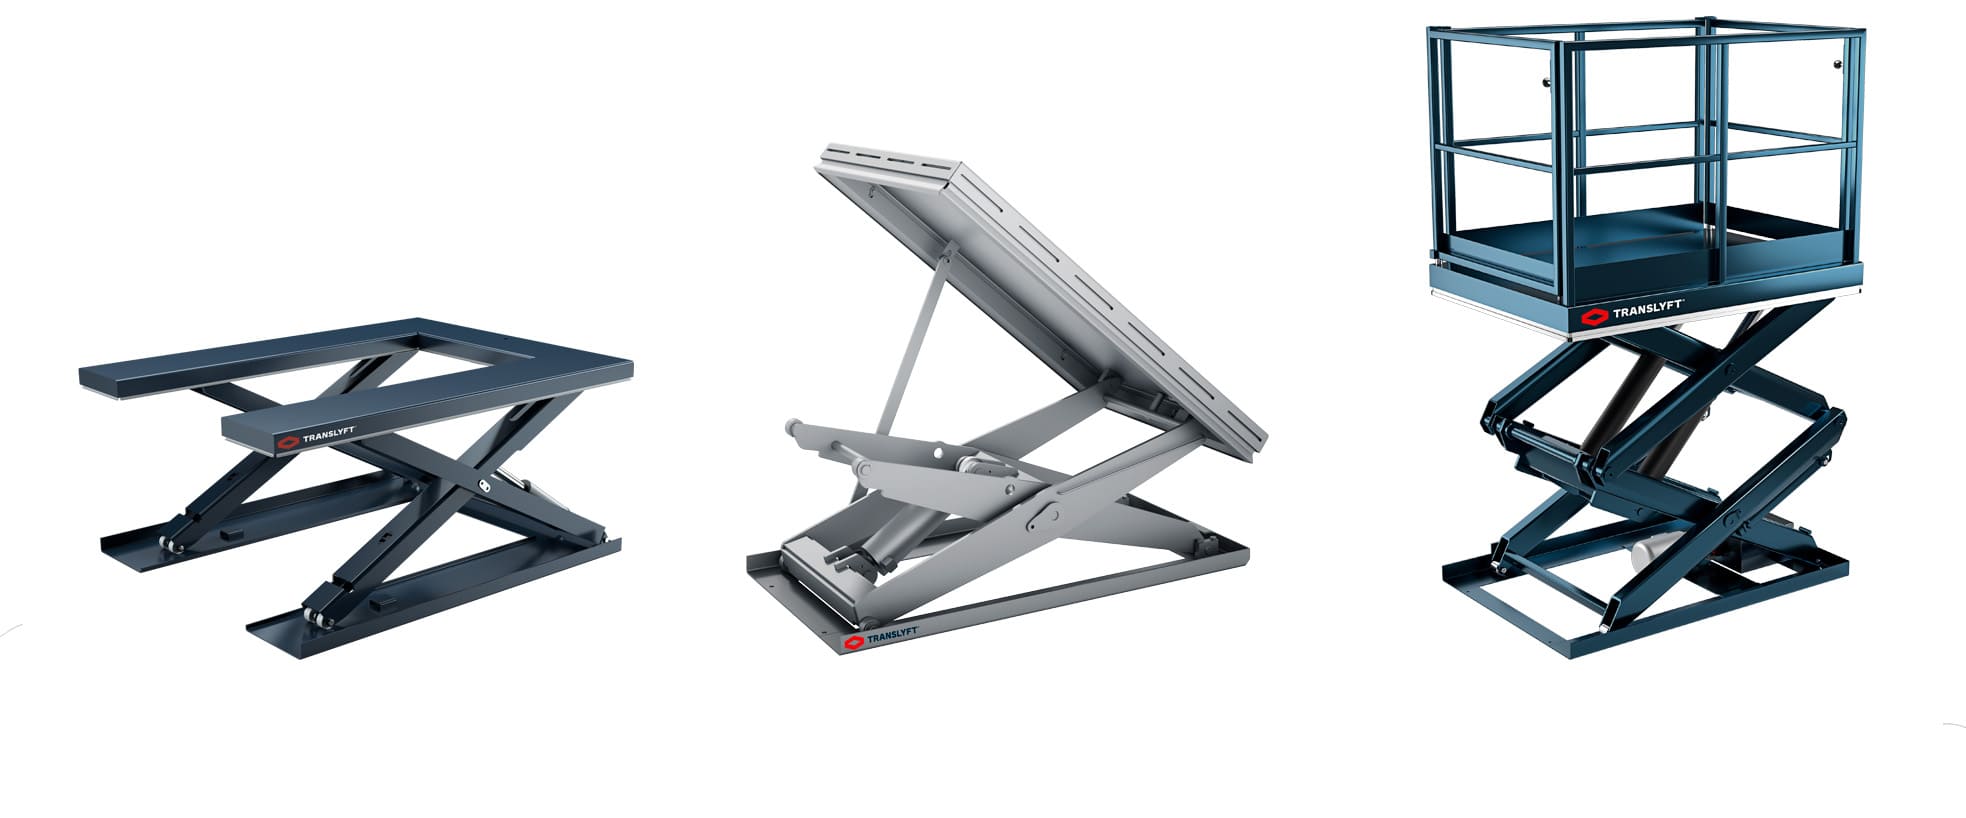 Different types of Translyft lifting tables